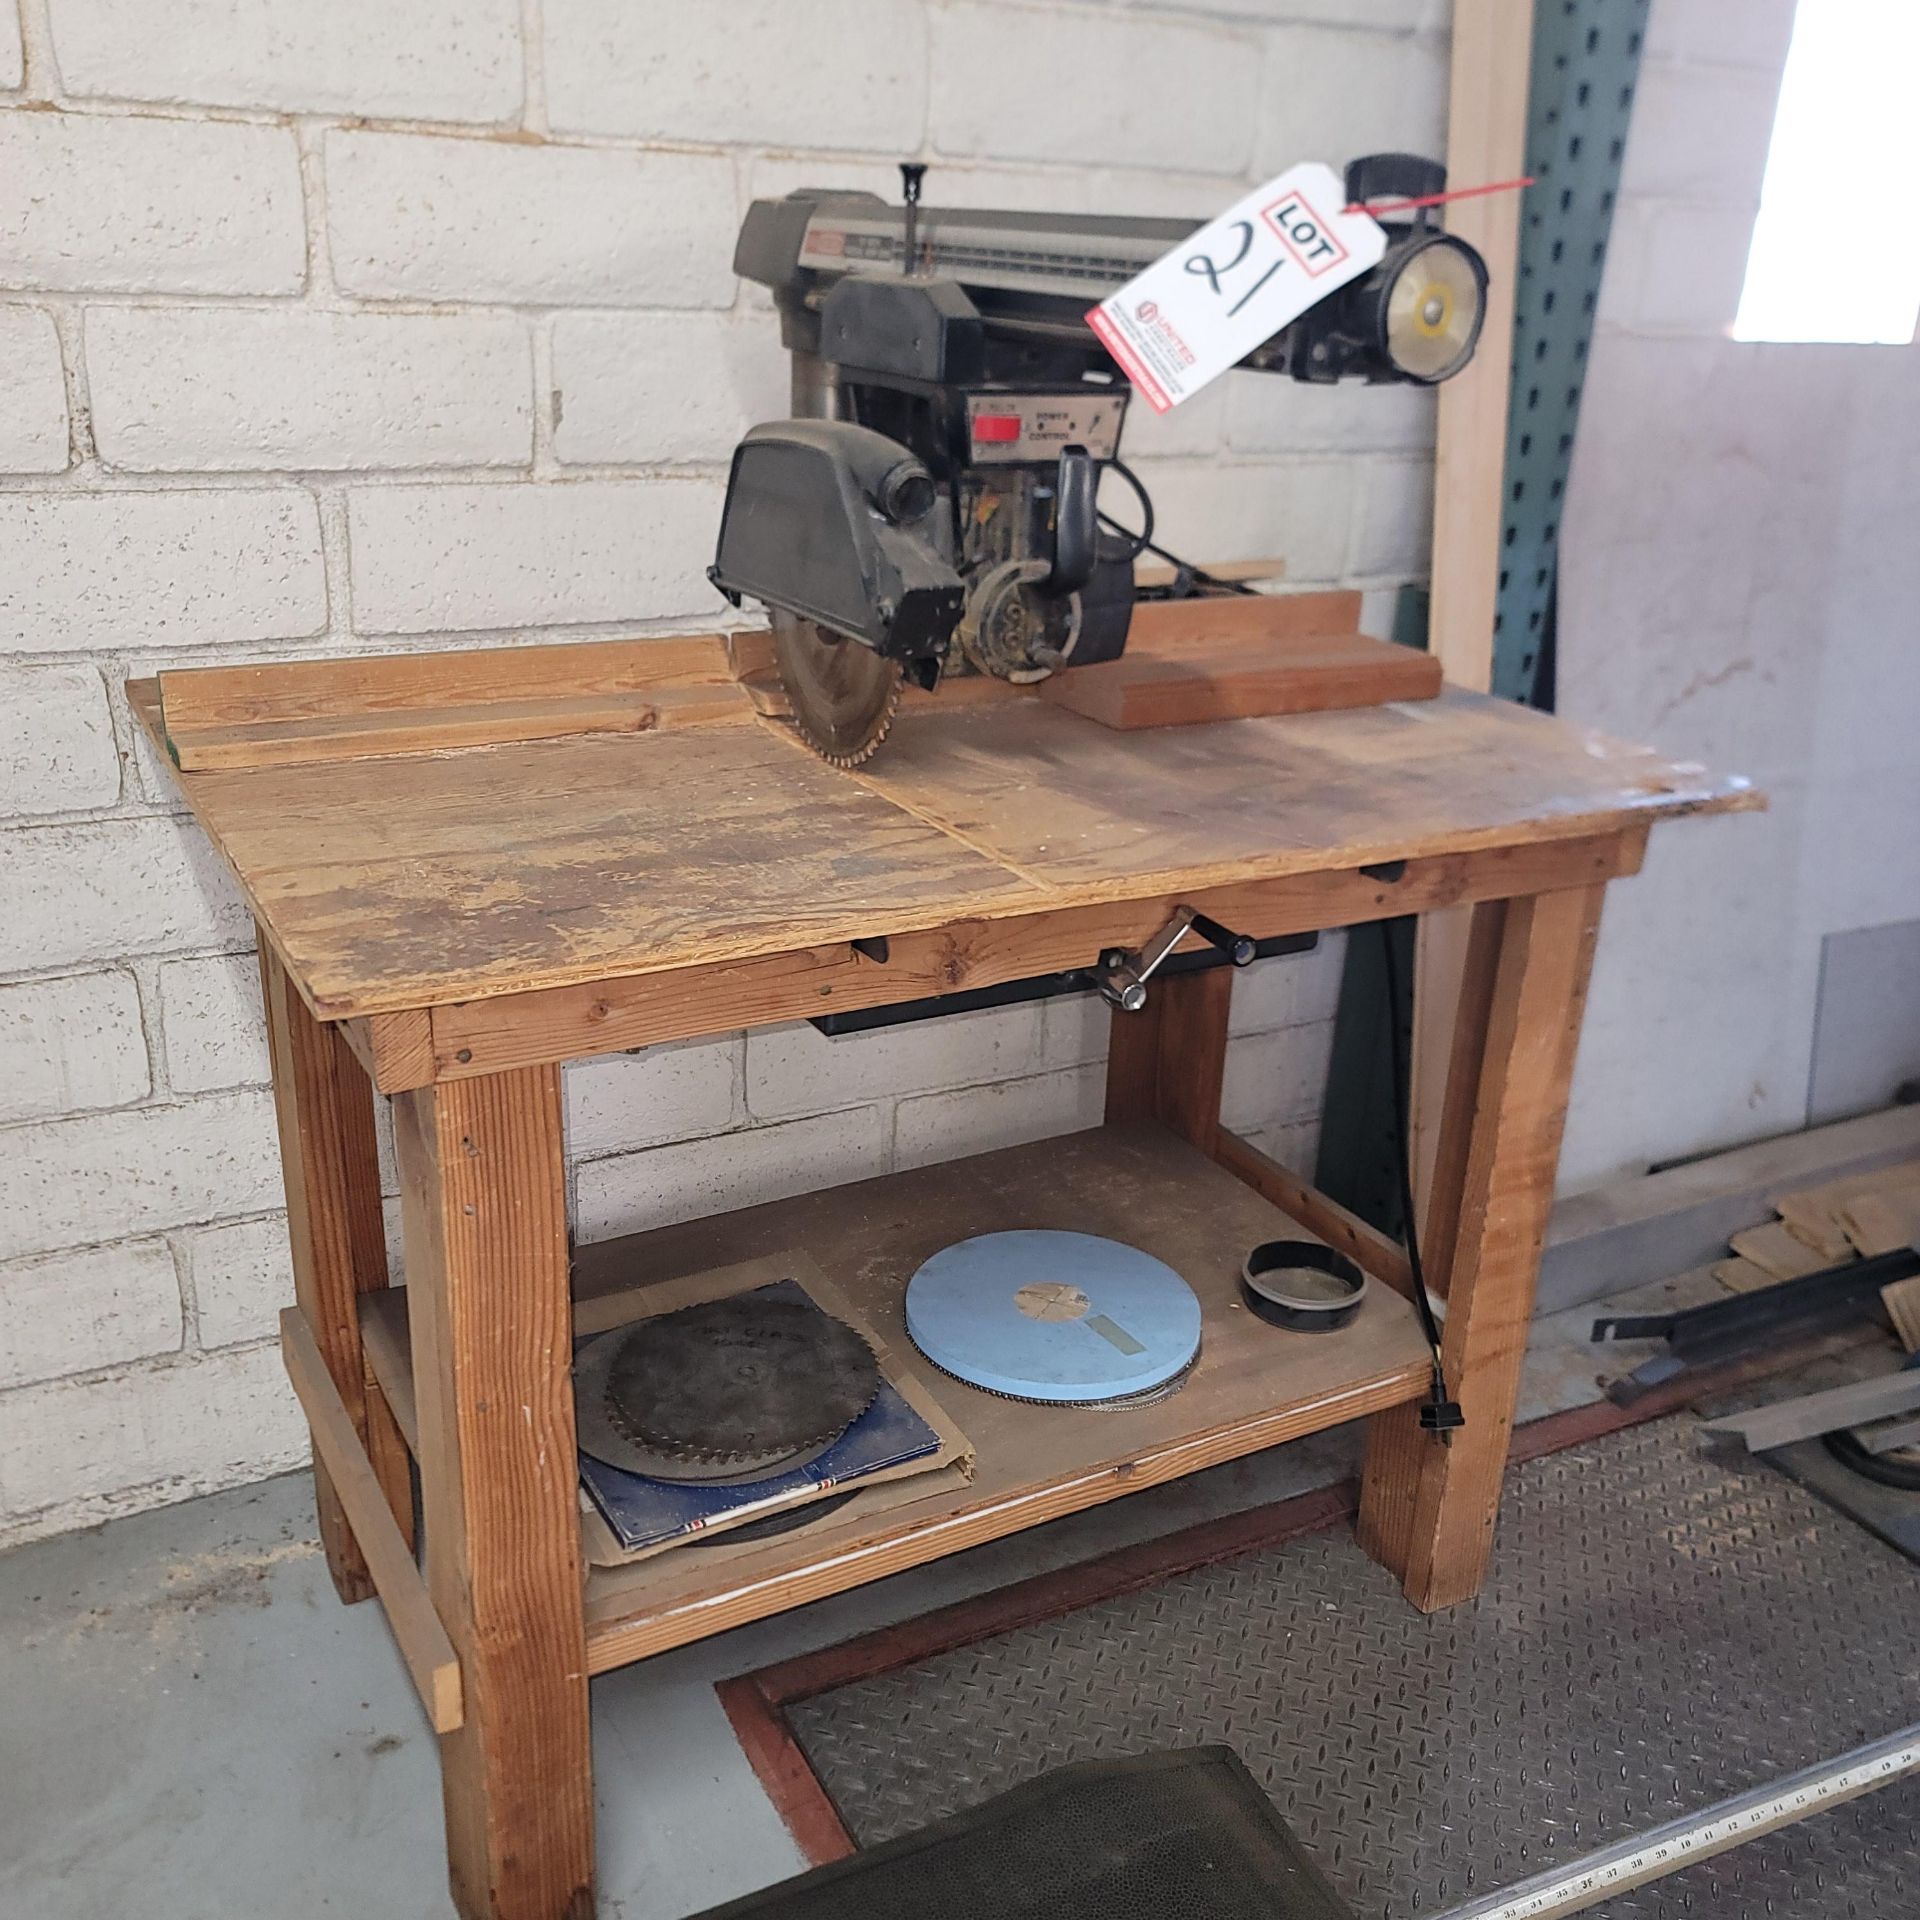 SEARS CRAFTSMAN 10" RADIAL ARM SAW, W/ BENCH AND MULTIPLE BLADES